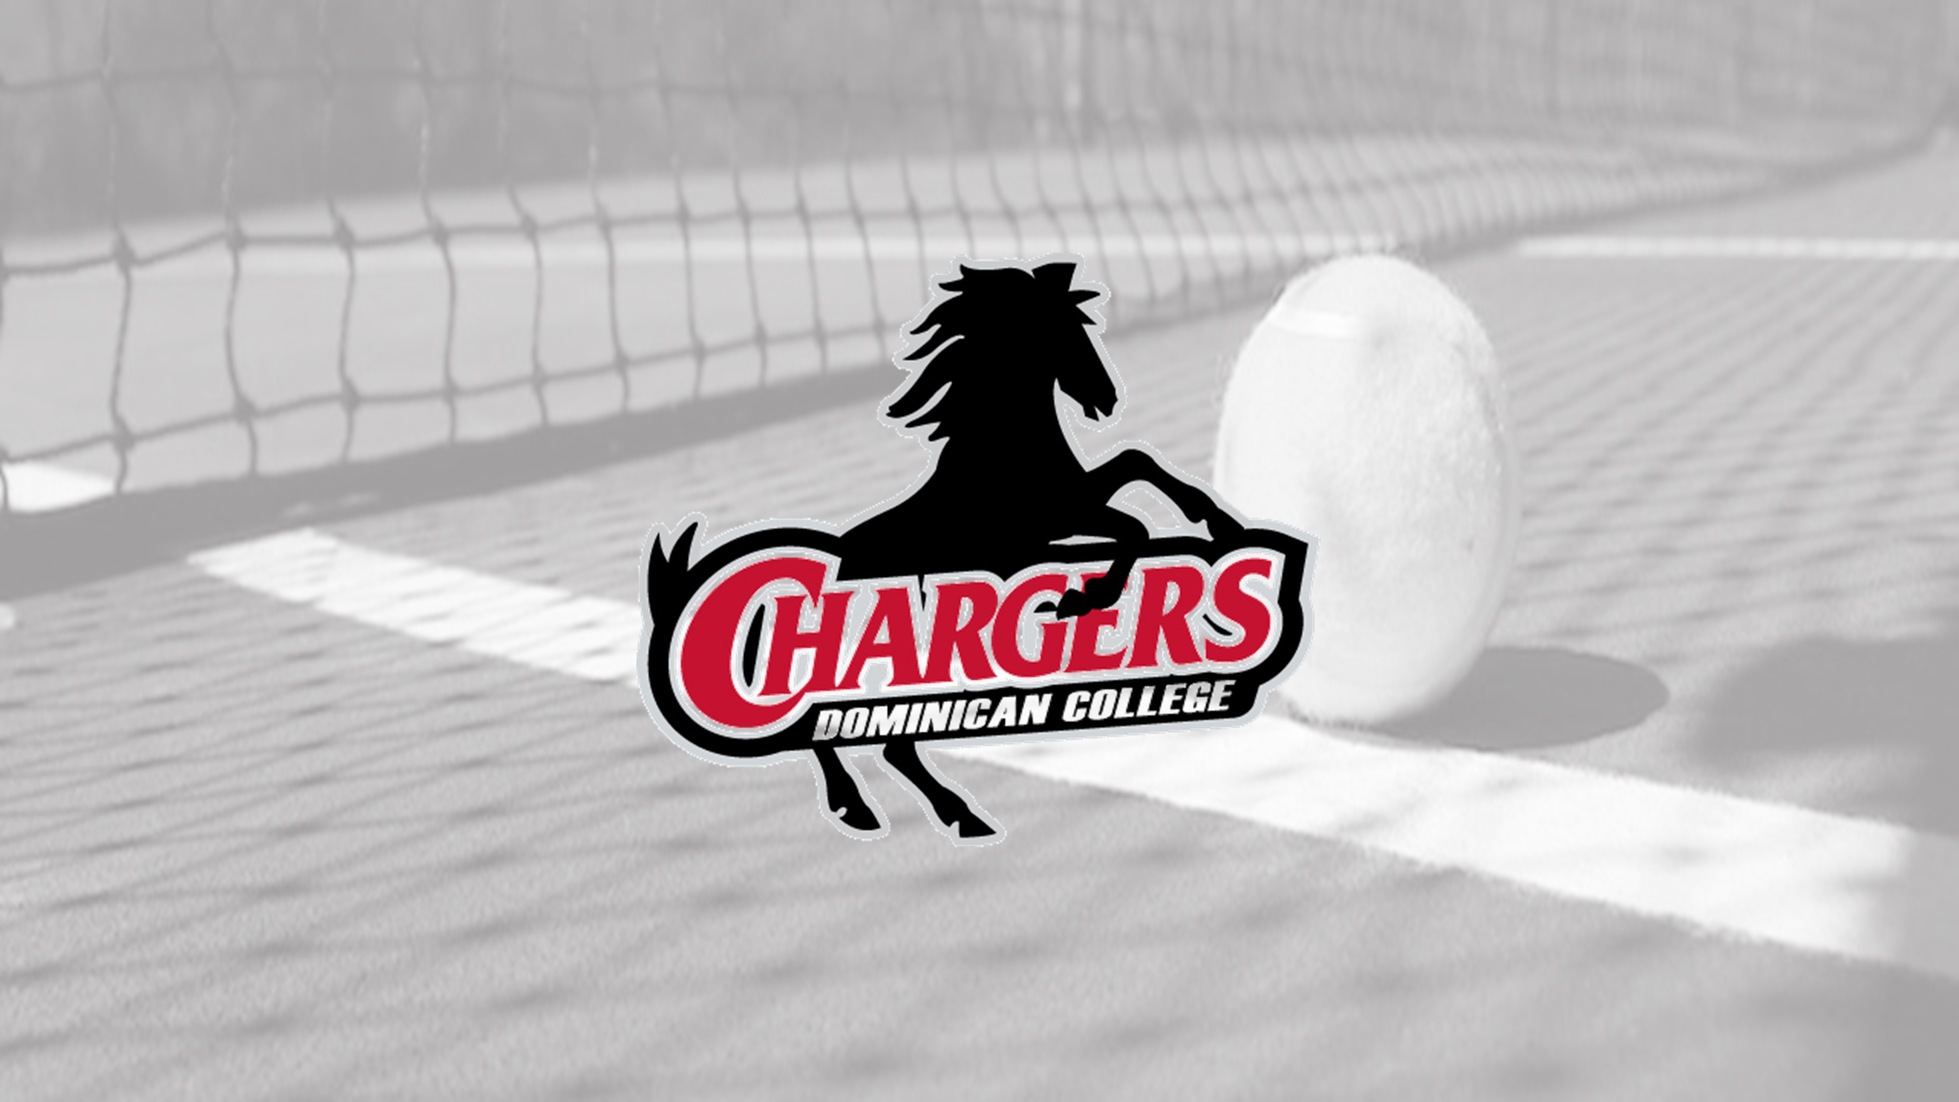 DOMINICAN COLLEGE TO ADD MEN’S AND WOMEN’S TENNIS TO 2019-2020 ATHLETICS LINEUP